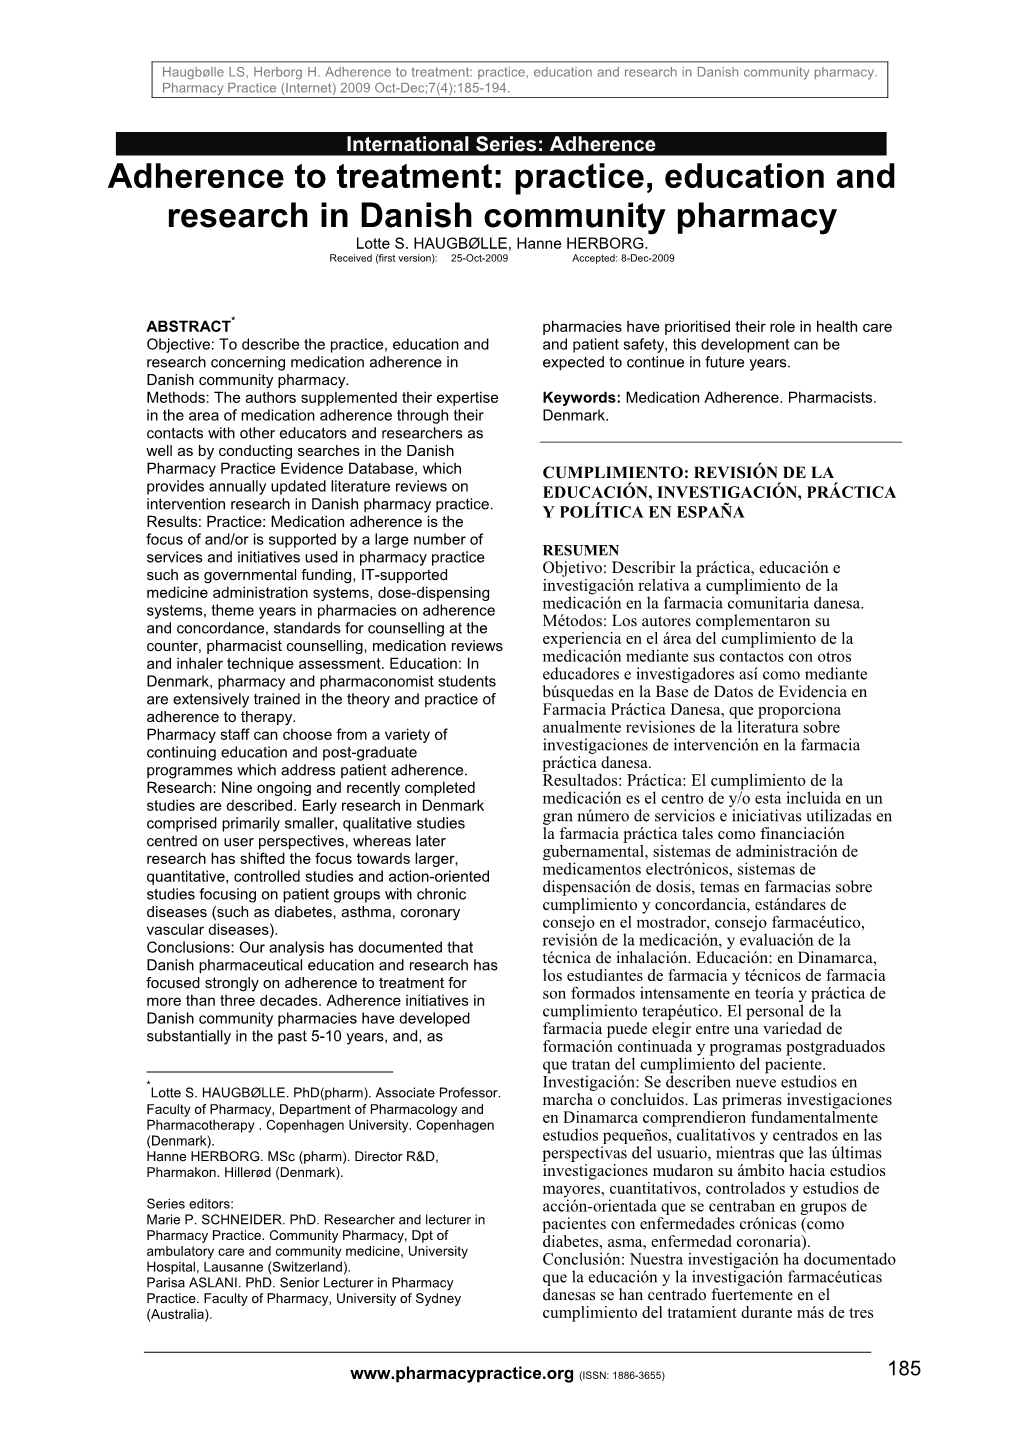 Adherence to Treatment: Practice, Education and Research in Danish Community Pharmacy